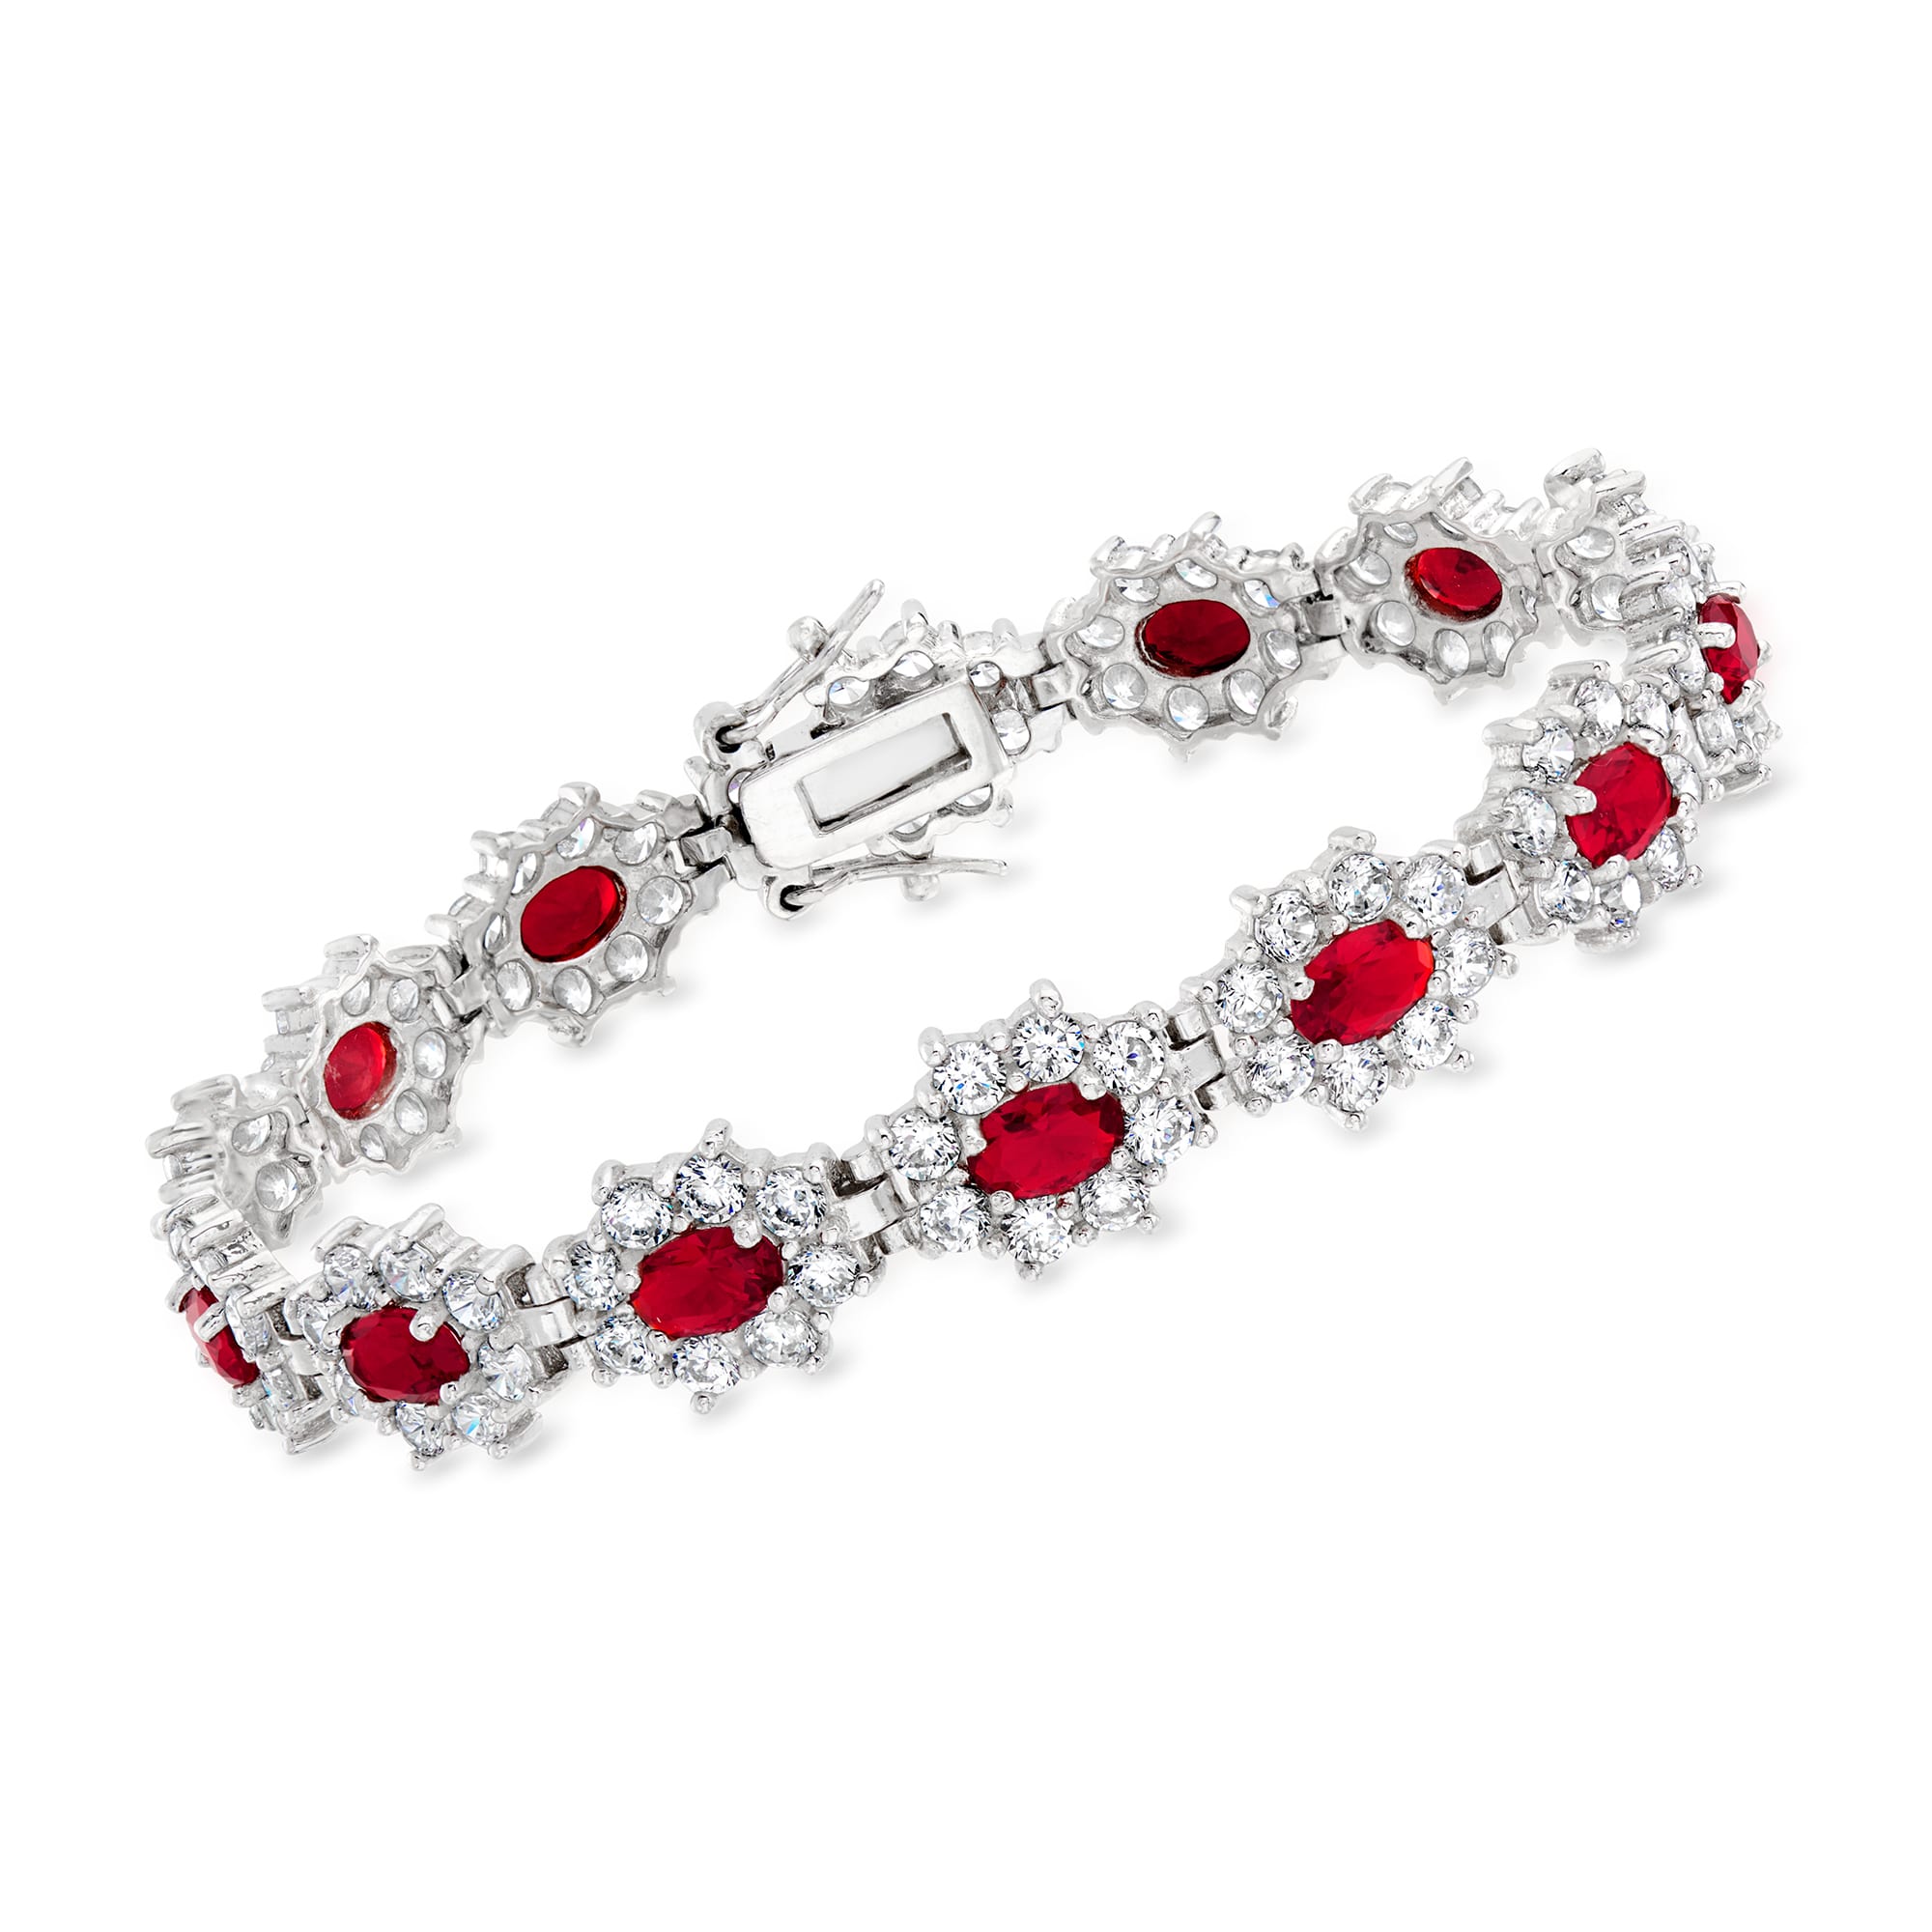 7.00 ct. t.w. Simulated Ruby and 6.00 ct. t.w. CZ Flower Bracelet in ...